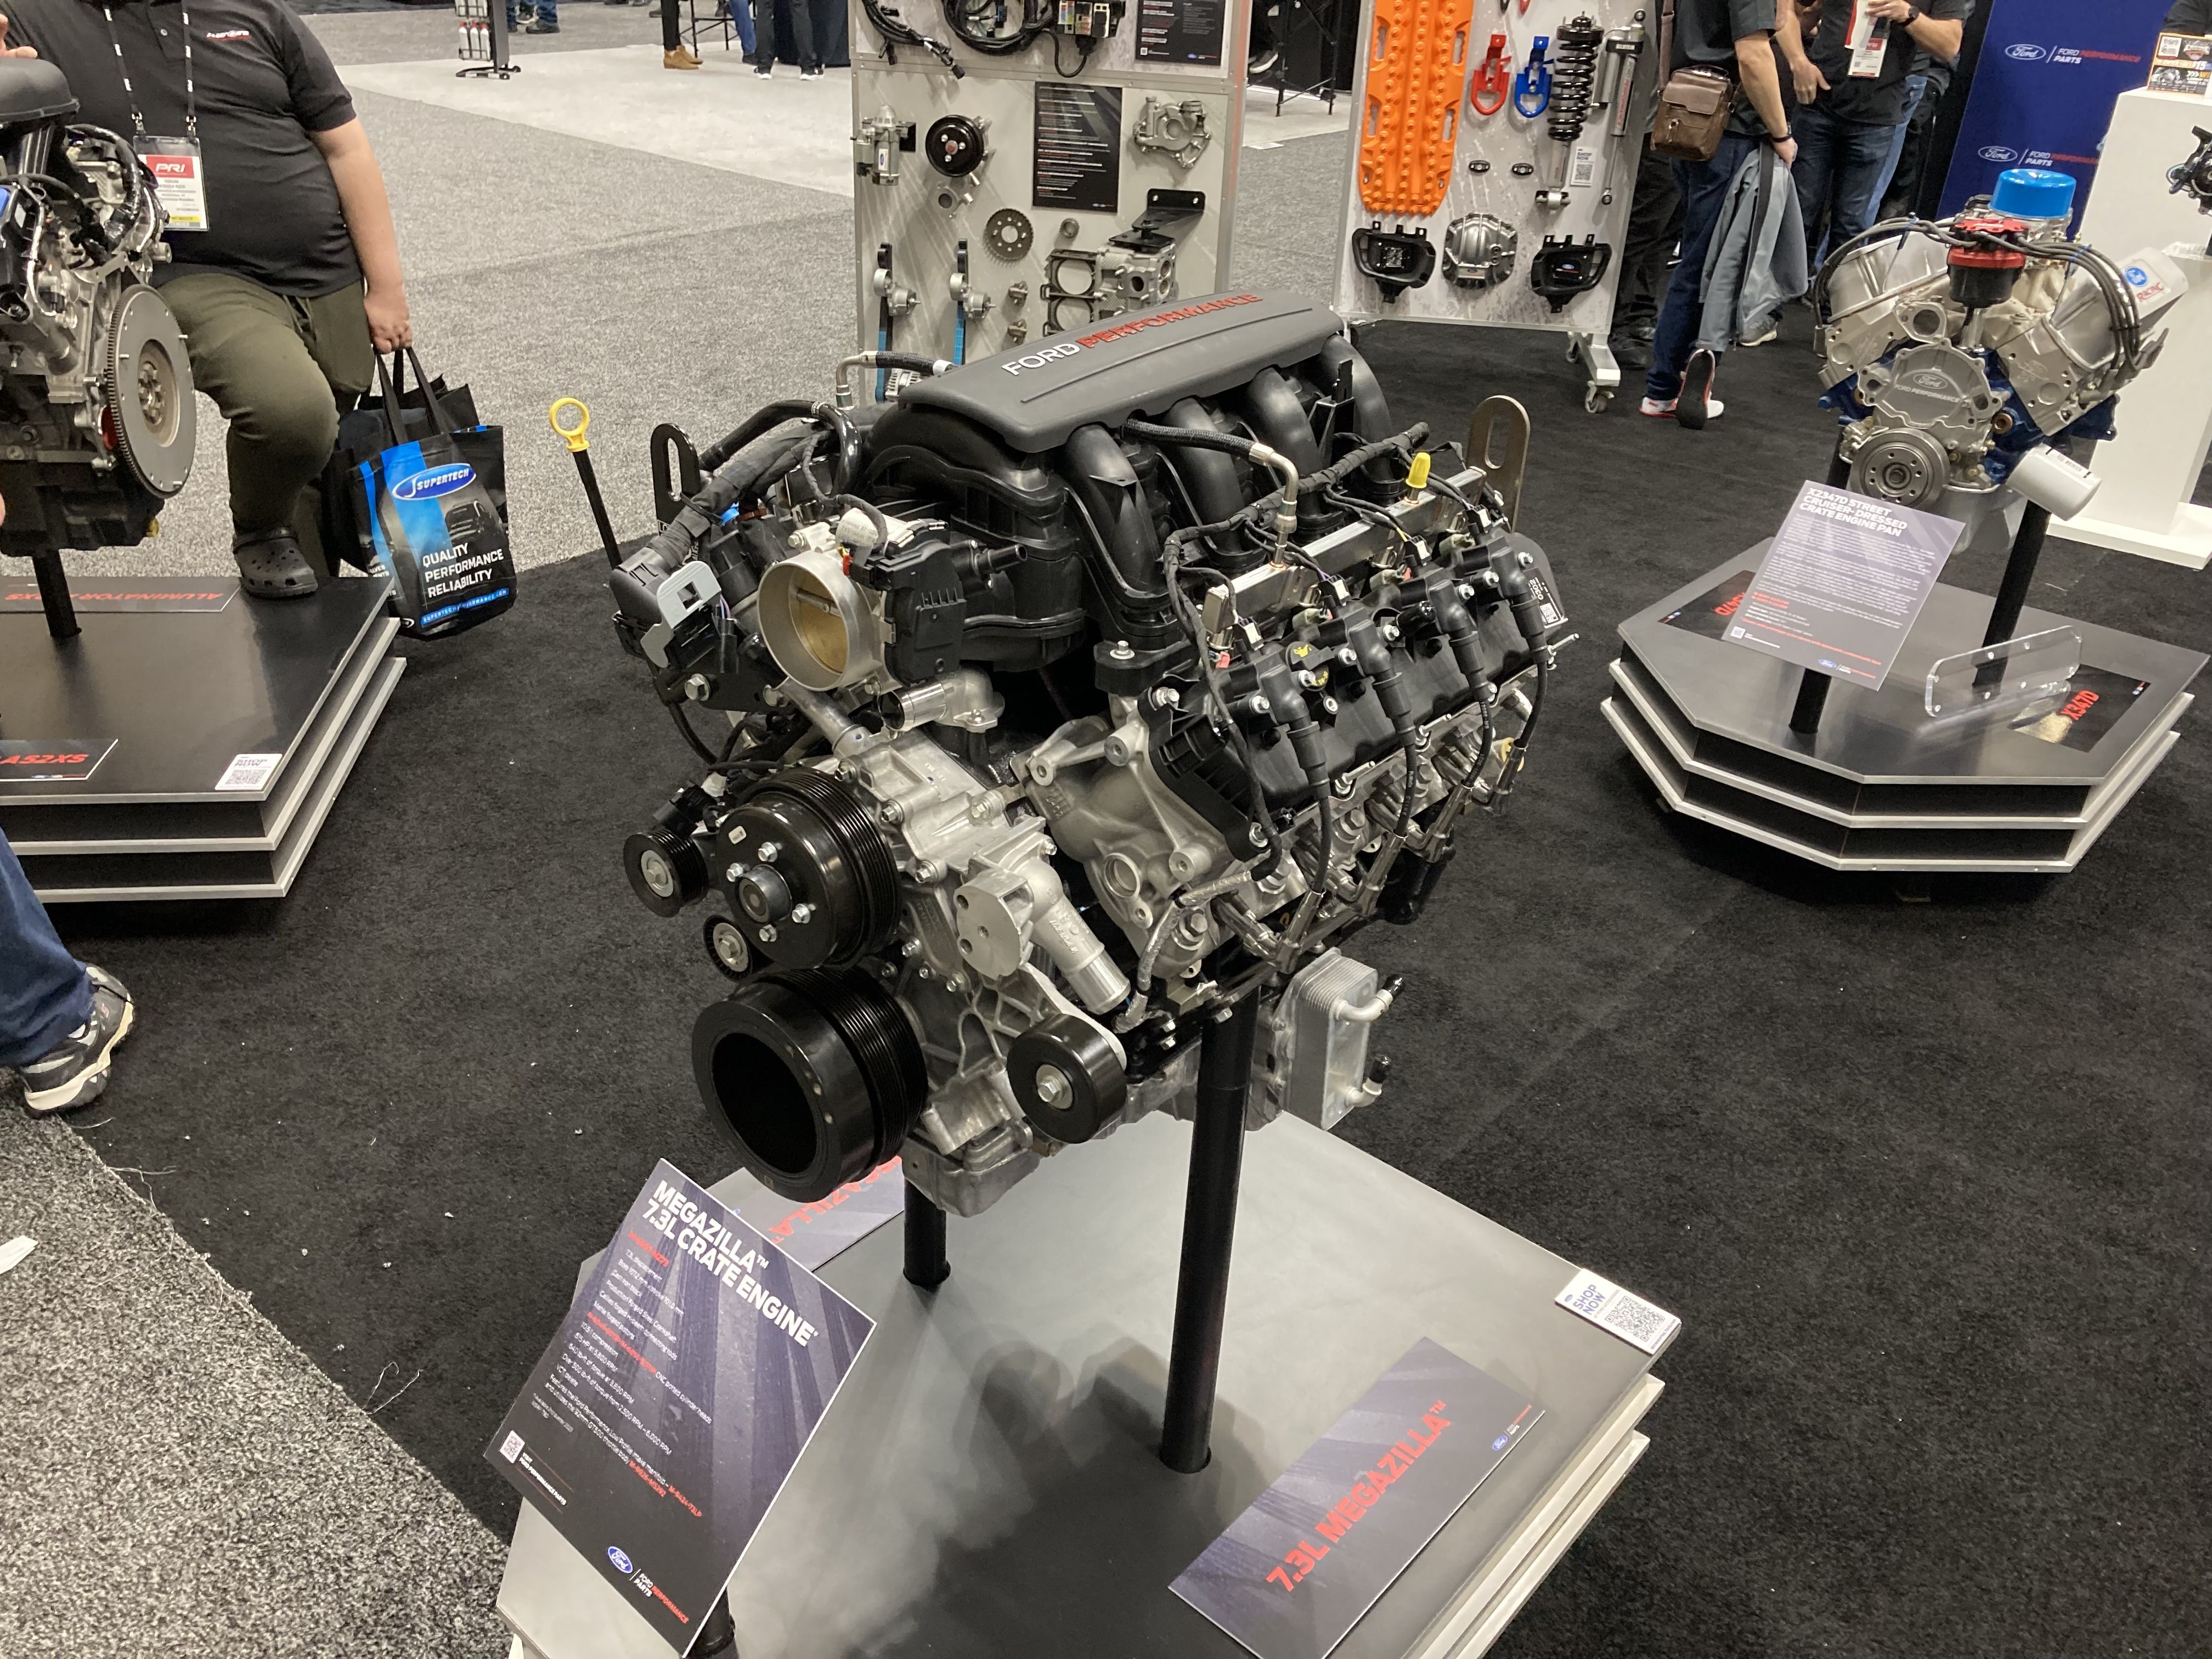 Ford Megazilla Crate Engine Gets 615 HP Thanks to Forged Internals